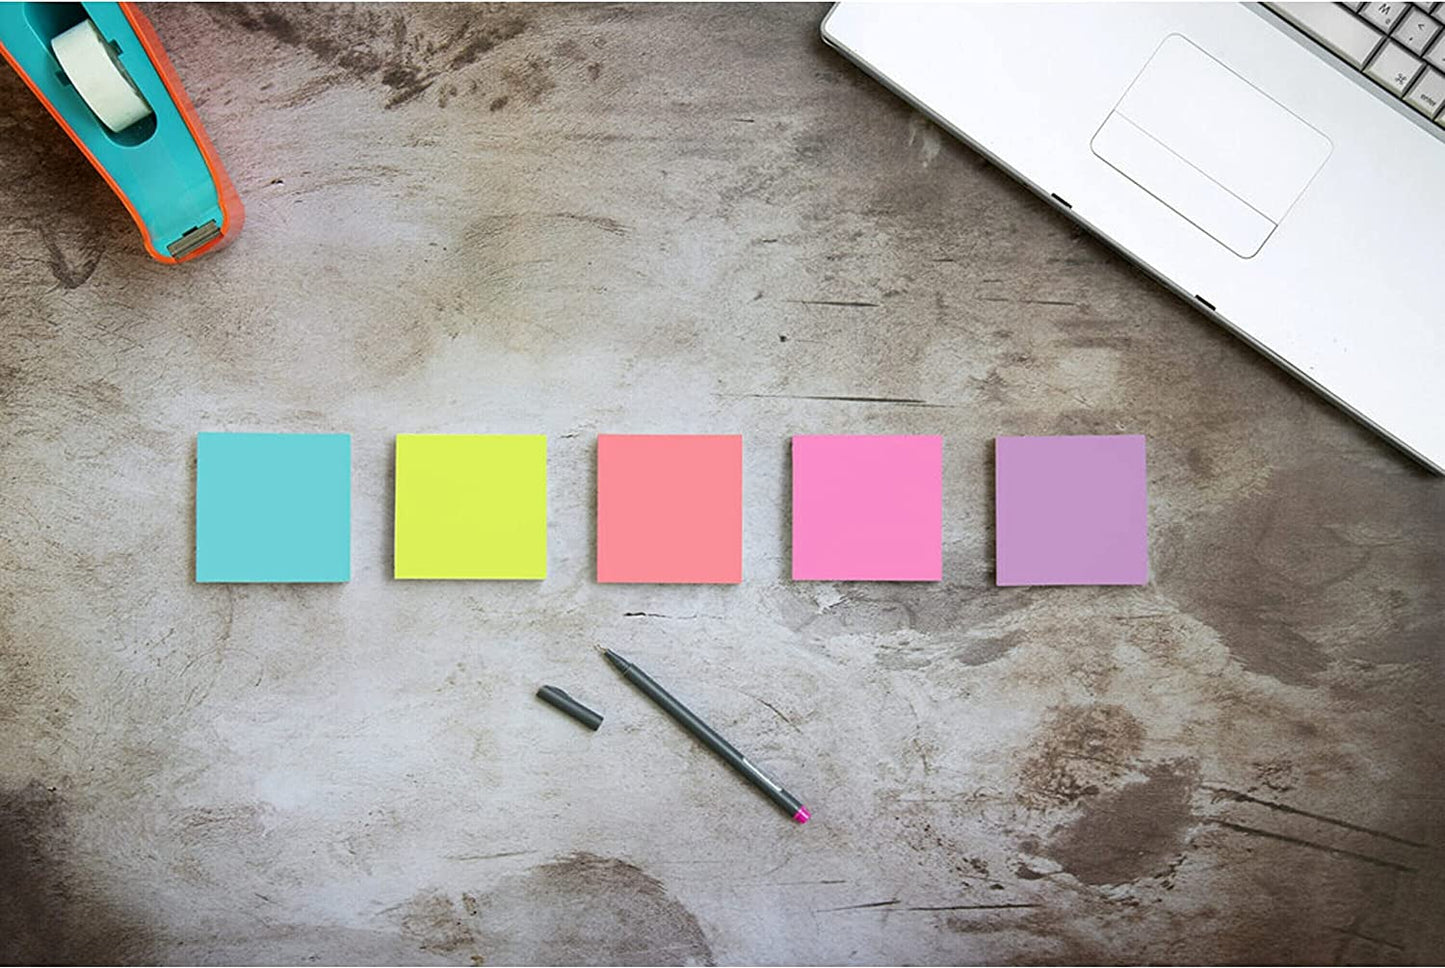 Super Sticky Notes, 76.2 Mm X 76.2 Mm, 24 Pads, 2X the Sticking Power, Supernova Neons, Bright Colors, Recyclable